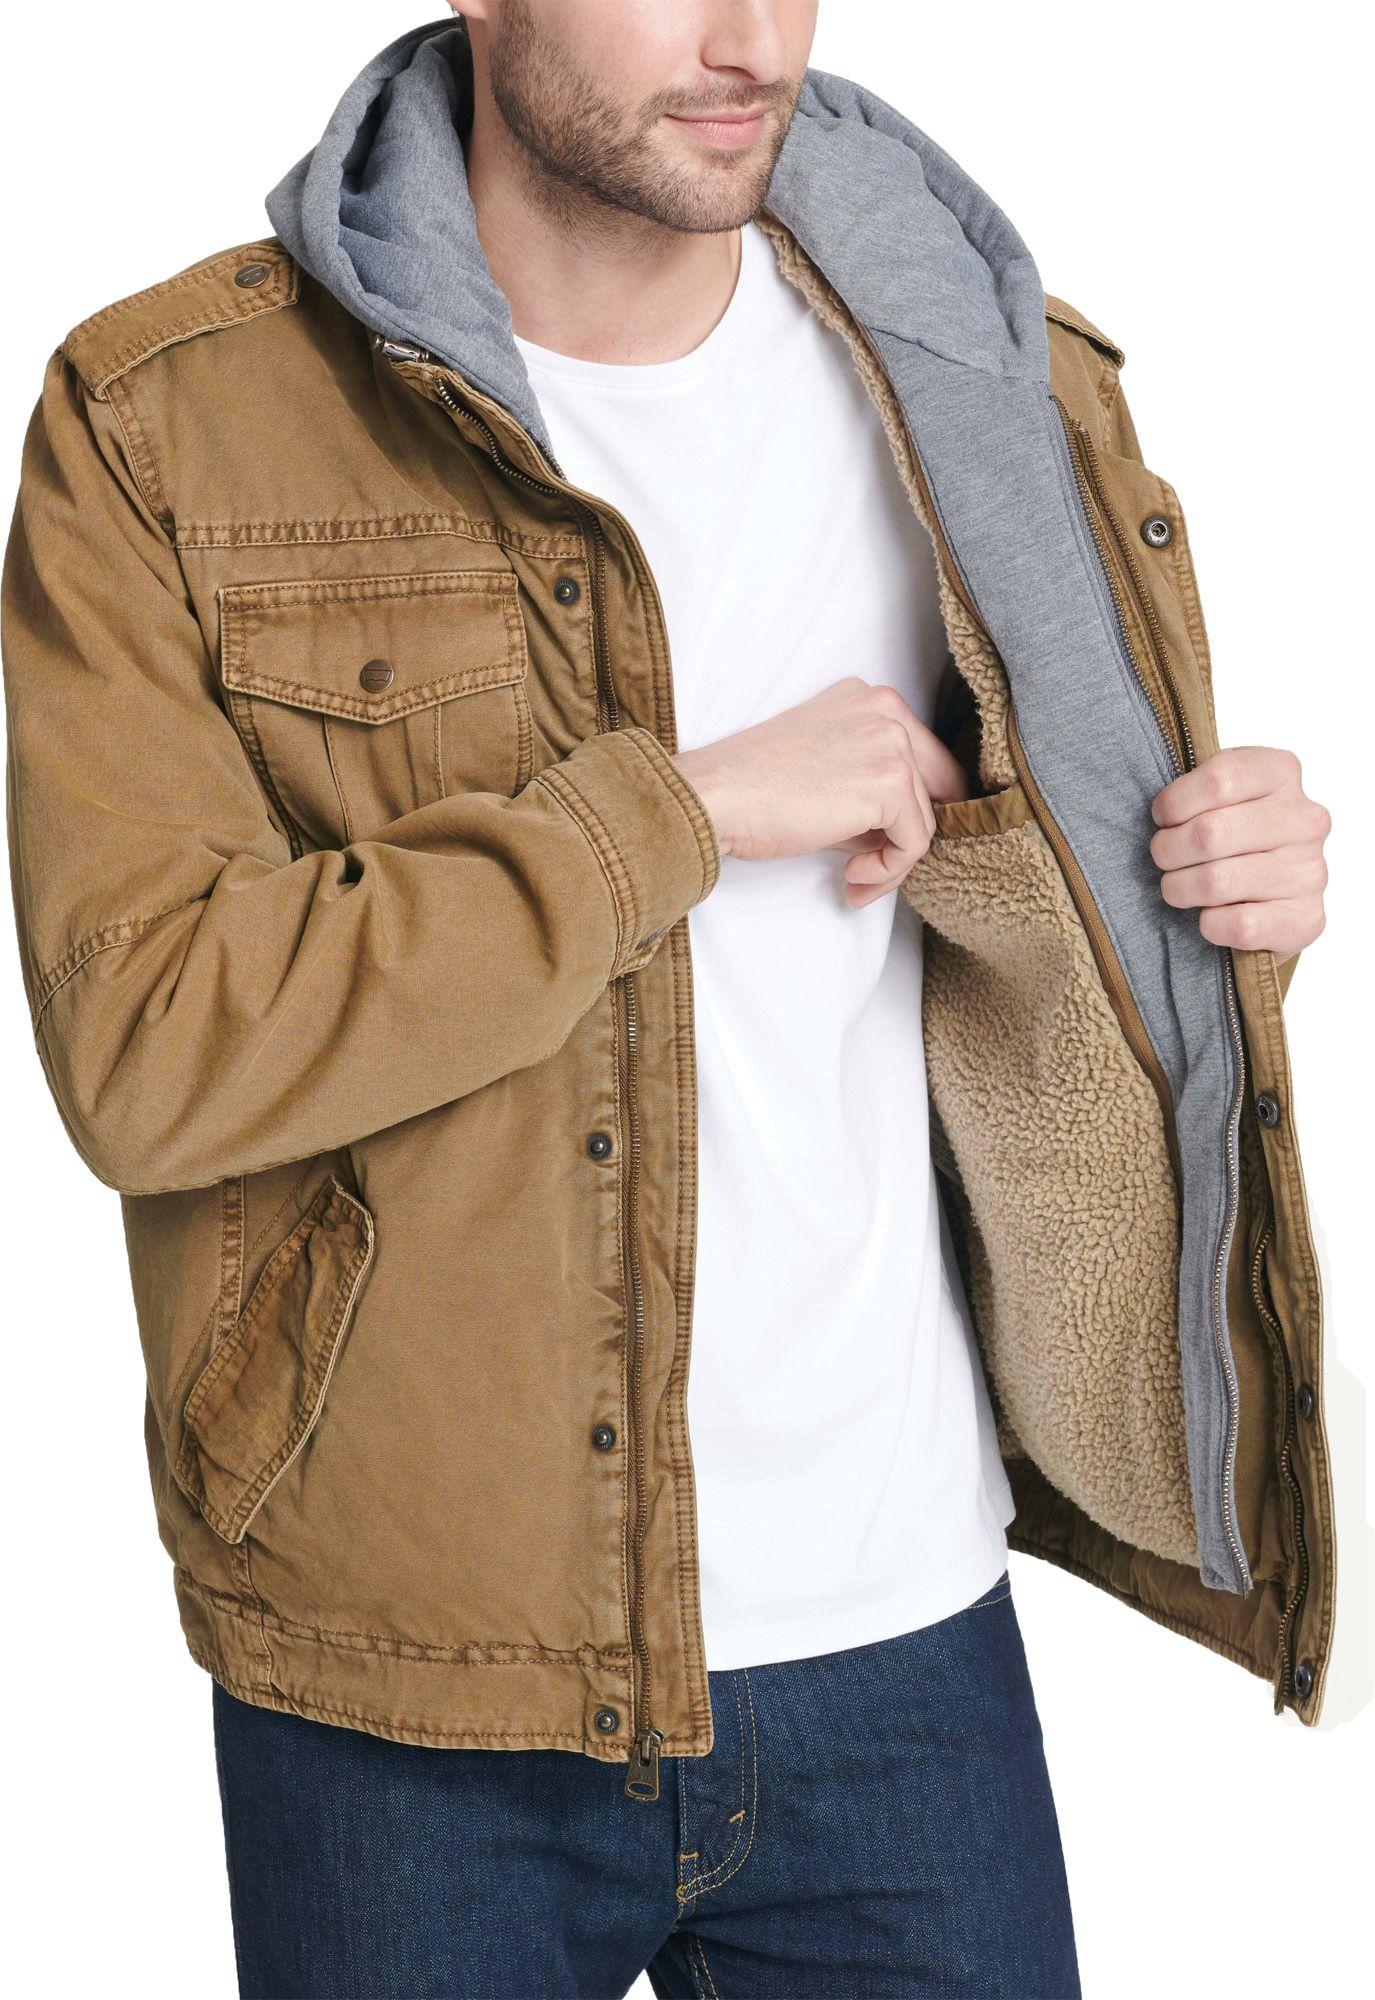 Levi's Sherpa Lined Hooded Utility Jacket in Brown for Men - Lyst